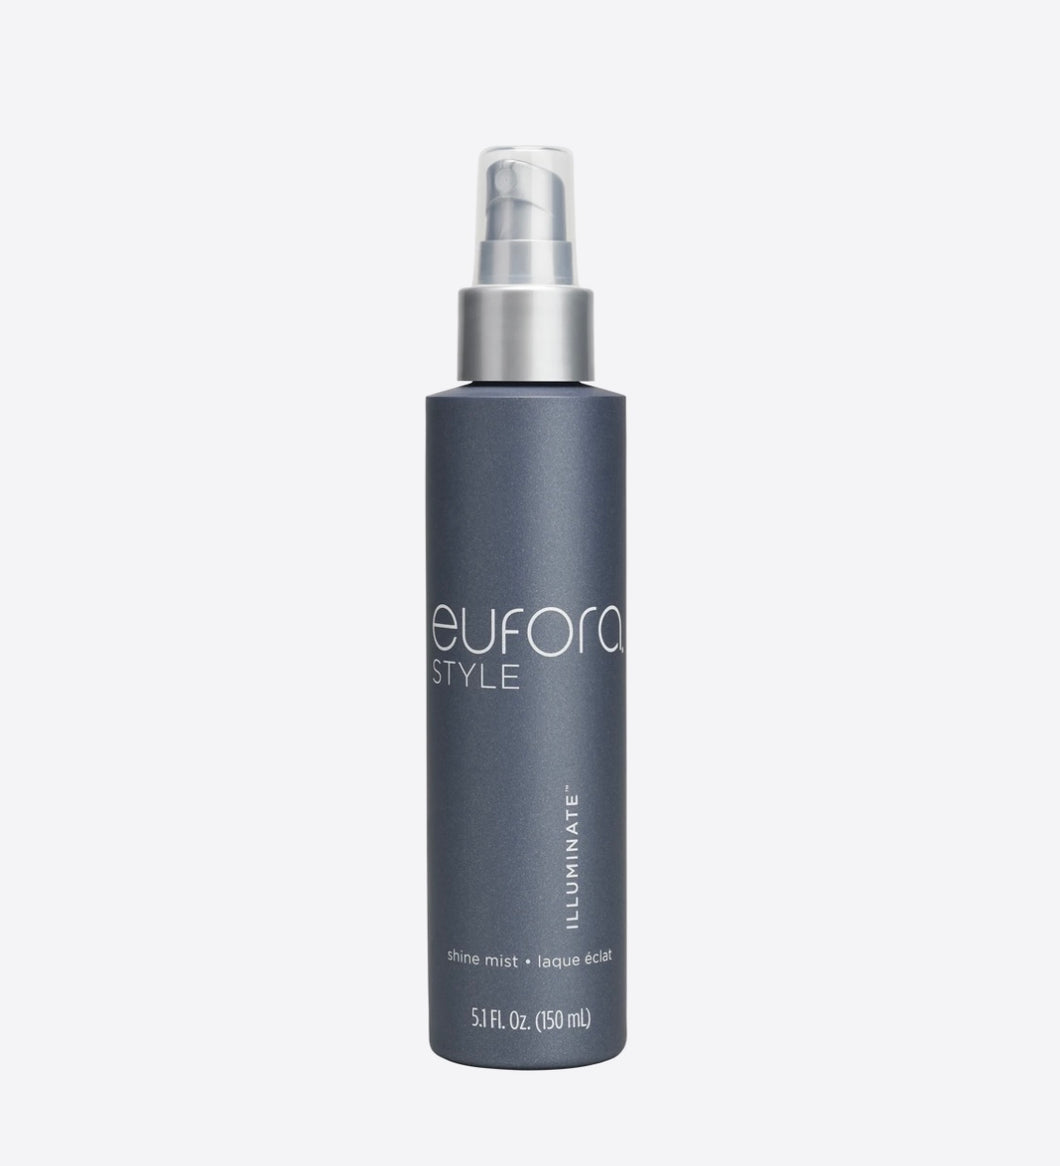 Eufora Illuminate shine spray is a Lightweight mist to create shine, add moisture and eliminate frizz.  Pair with Sculpture for our colour locking system and retain your hair colour longer.